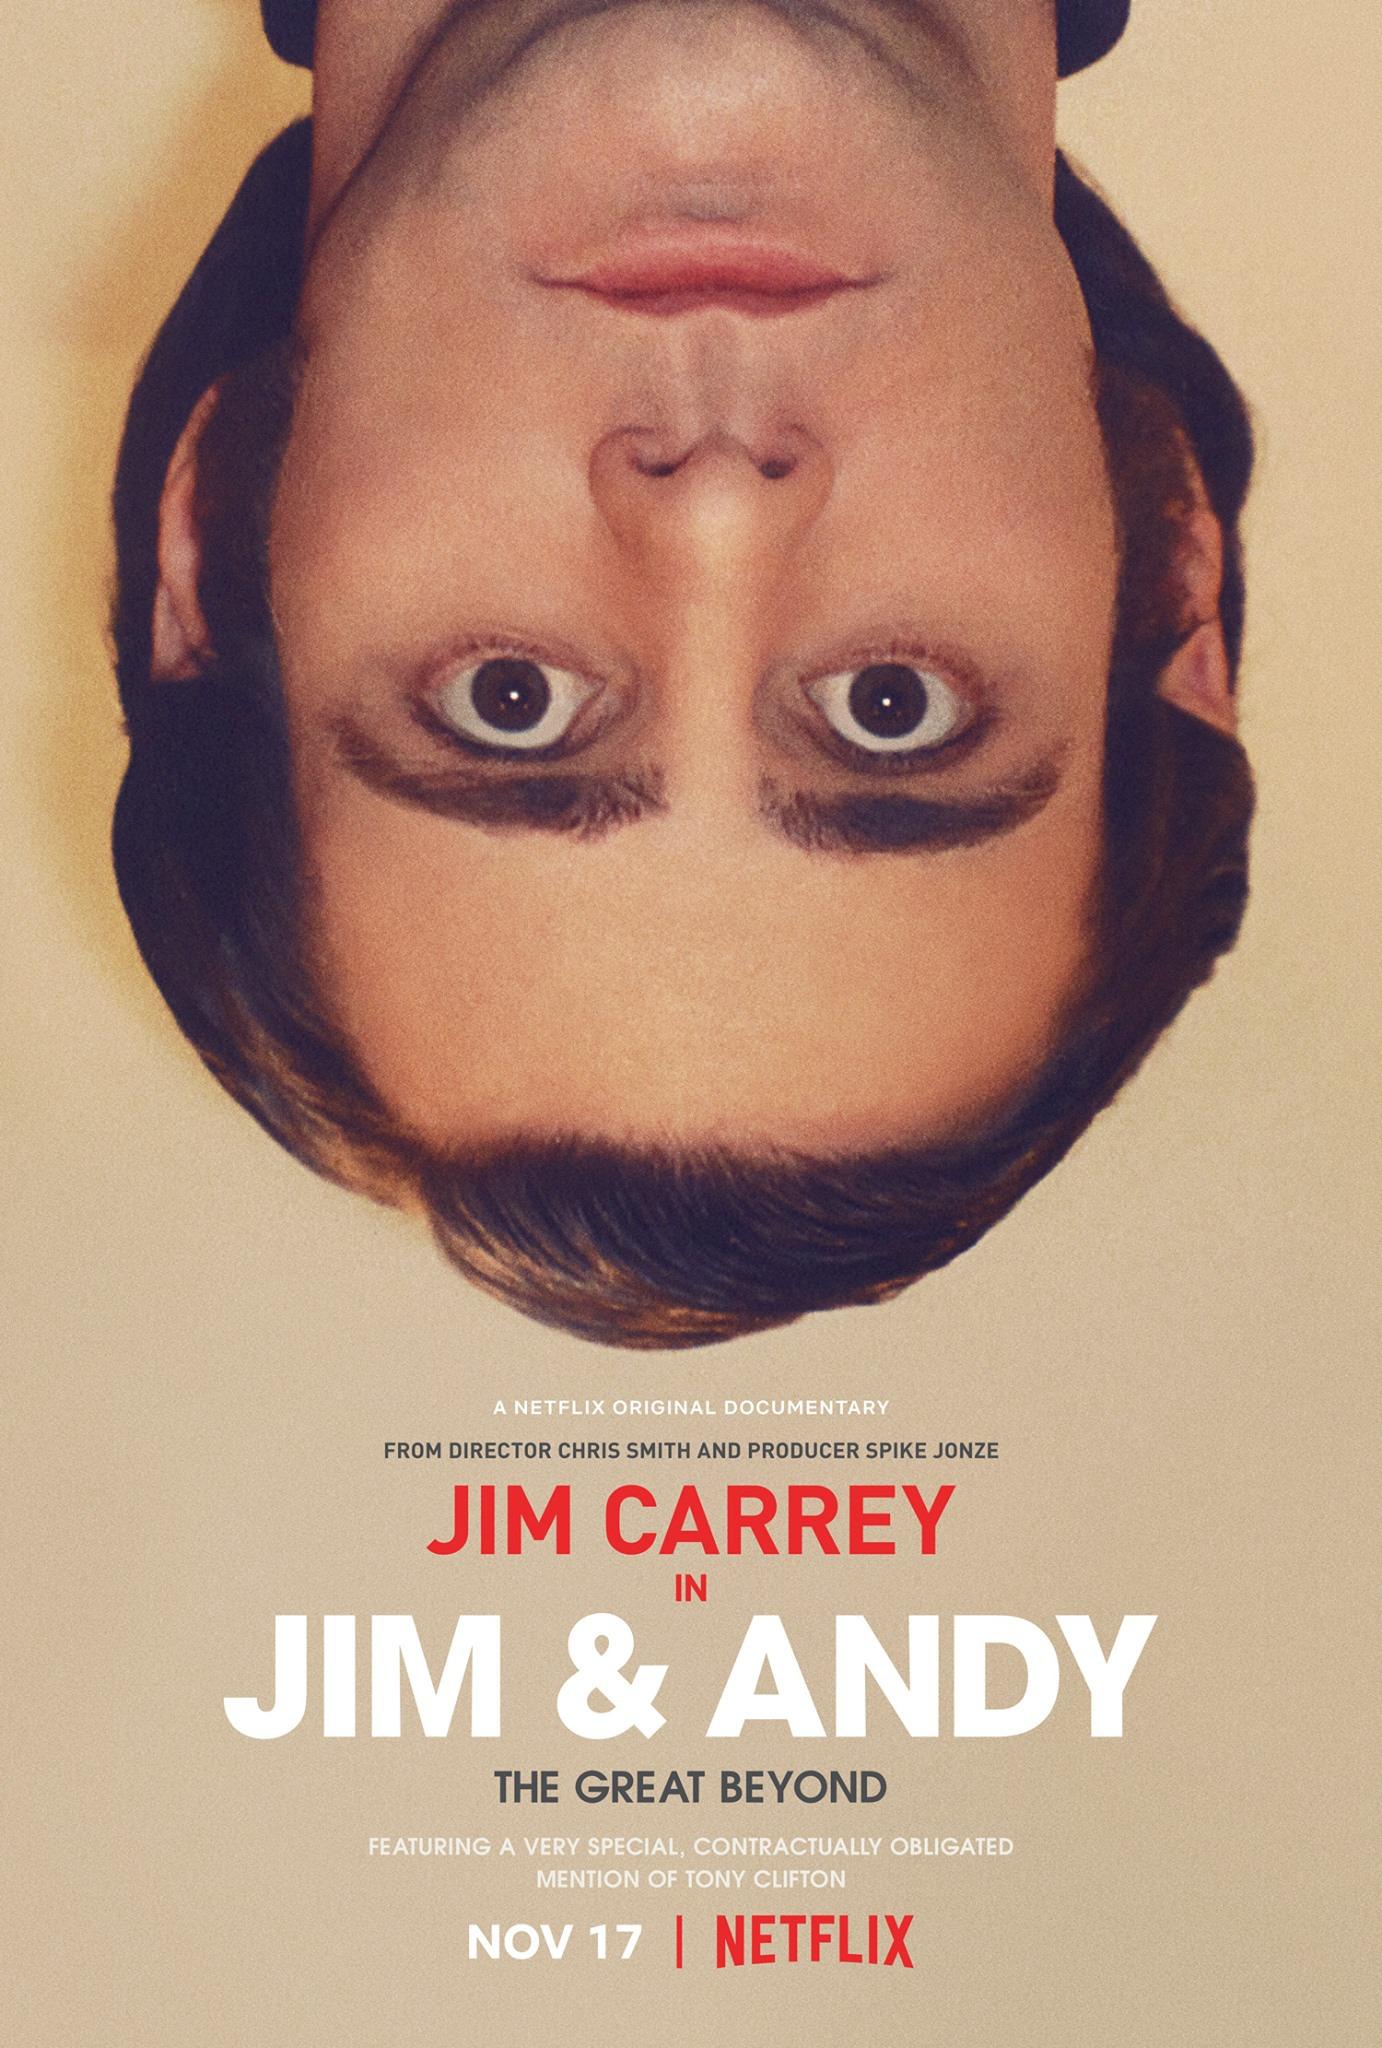 Постер фильма Джим и Энди: Другой мир | Jim & Andy: The Great Beyond - The Story of Jim Carrey & Andy Kaufman Featuring a Very Special, Contractually Obligated Mention of Tony Clifton 